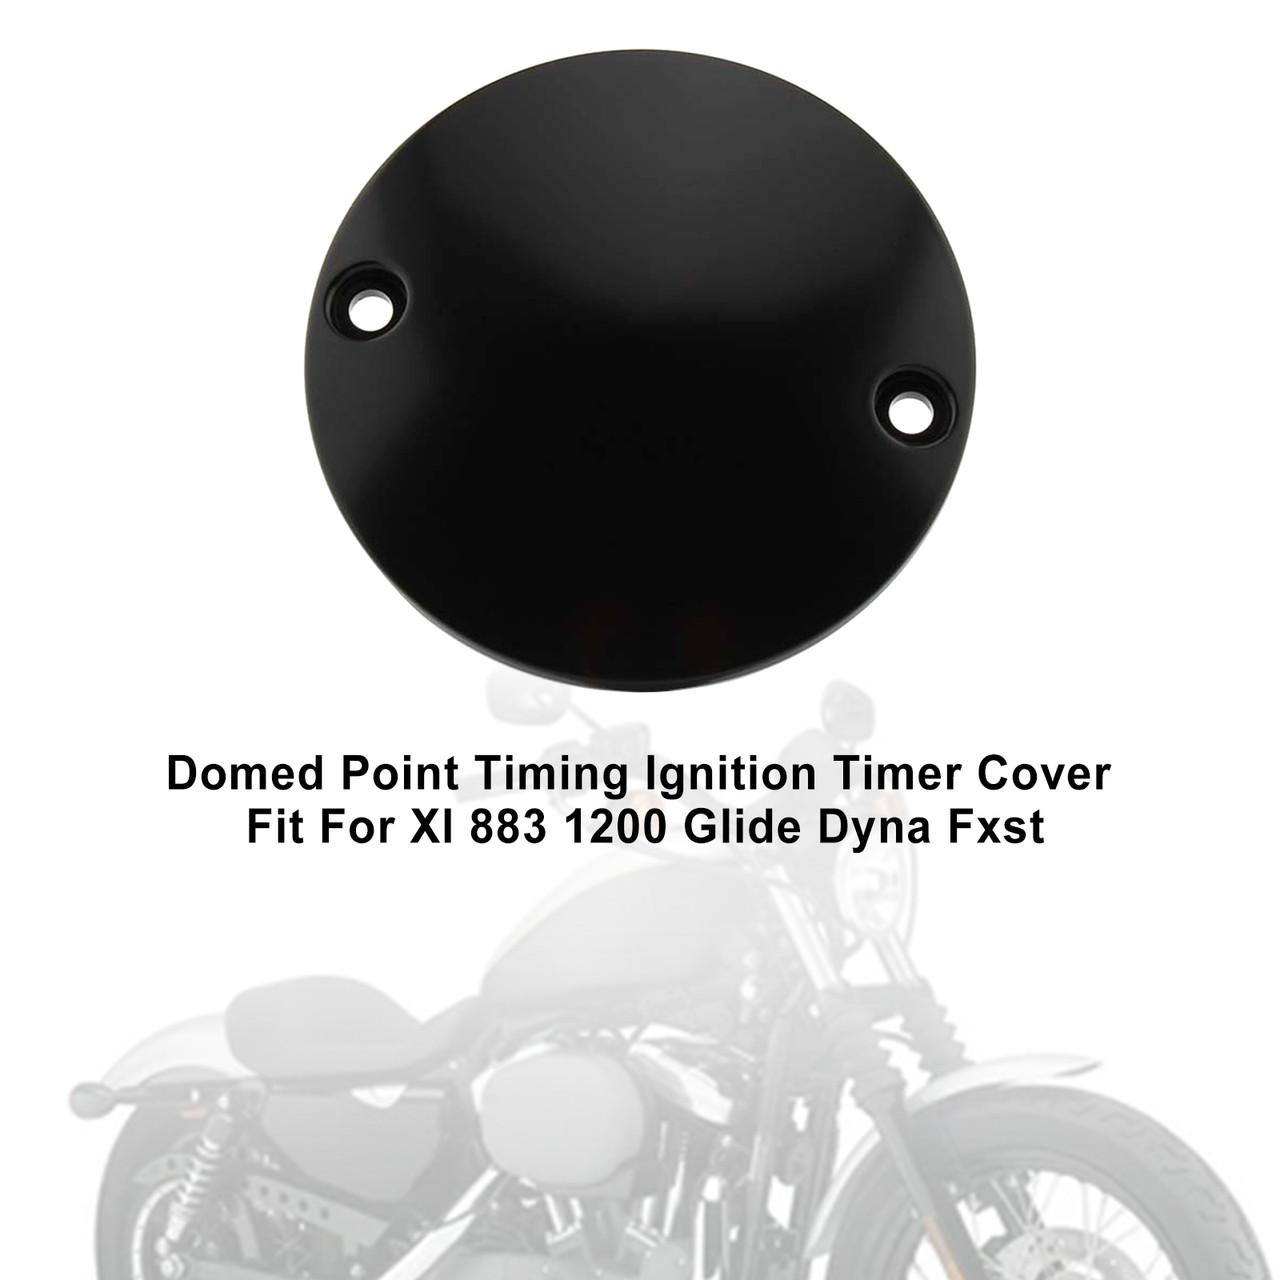 Timing Ignition Timer Cover Domed Point Chrome For Xl 883 1200 Glide Dyna Fxst